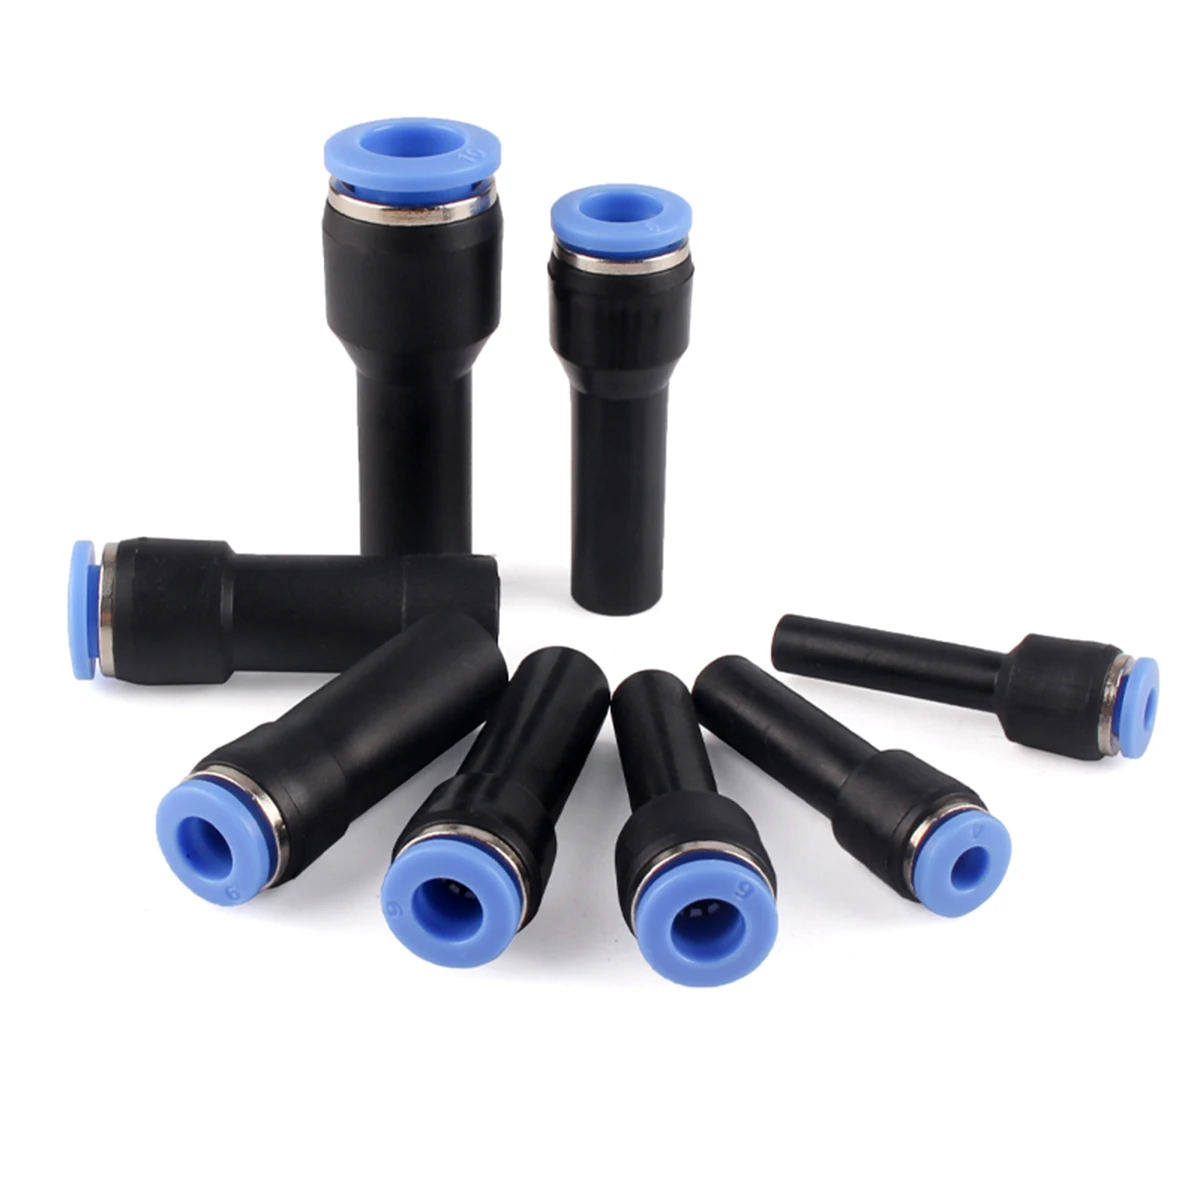 

Pneumatic Connector Fittings Plug Push In Reducer Through PGJ 6mm 8mm 10mm 12mm Tube To 4/6/8/10mm Tube 1PCS/5PCS